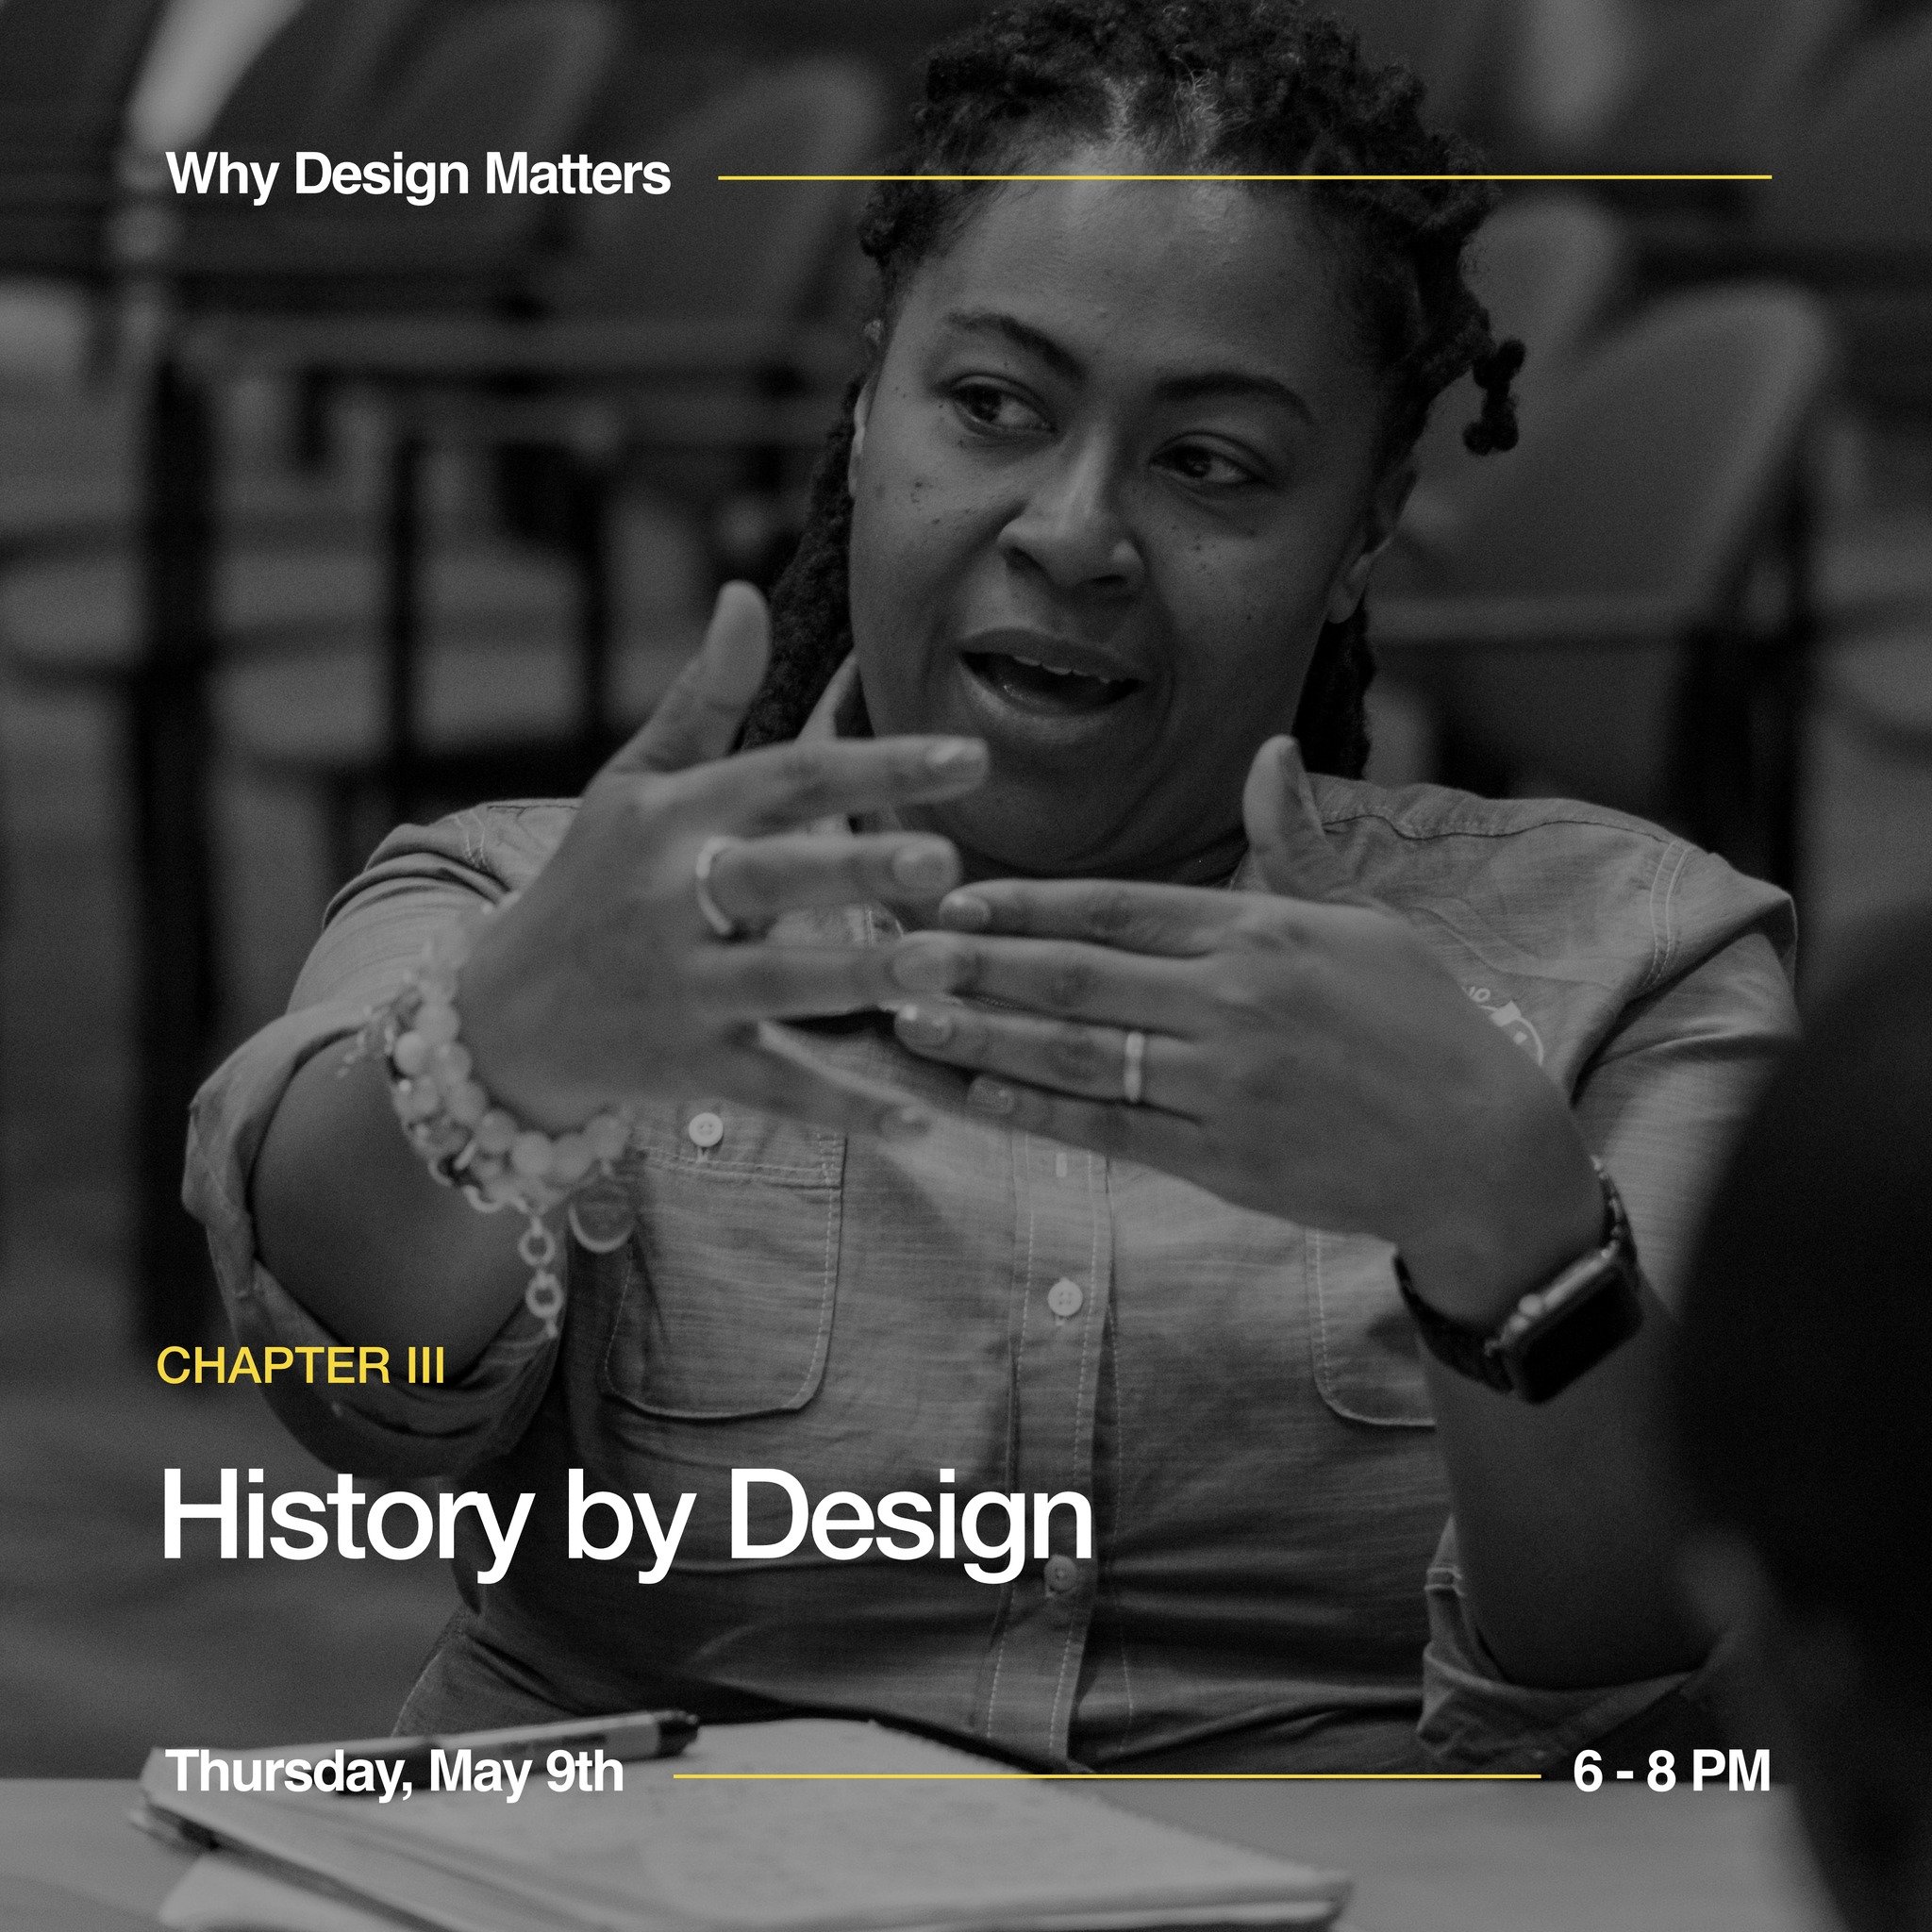 From vision to reality, Arthur Ashe Boulevard's design journey is one for the books! Chapter III: History by Design is going to be epic. 

Reserve your free tickets here: https://support.branchmuseum.org/event/aablvd-chapter-iii/e582643

For more inf